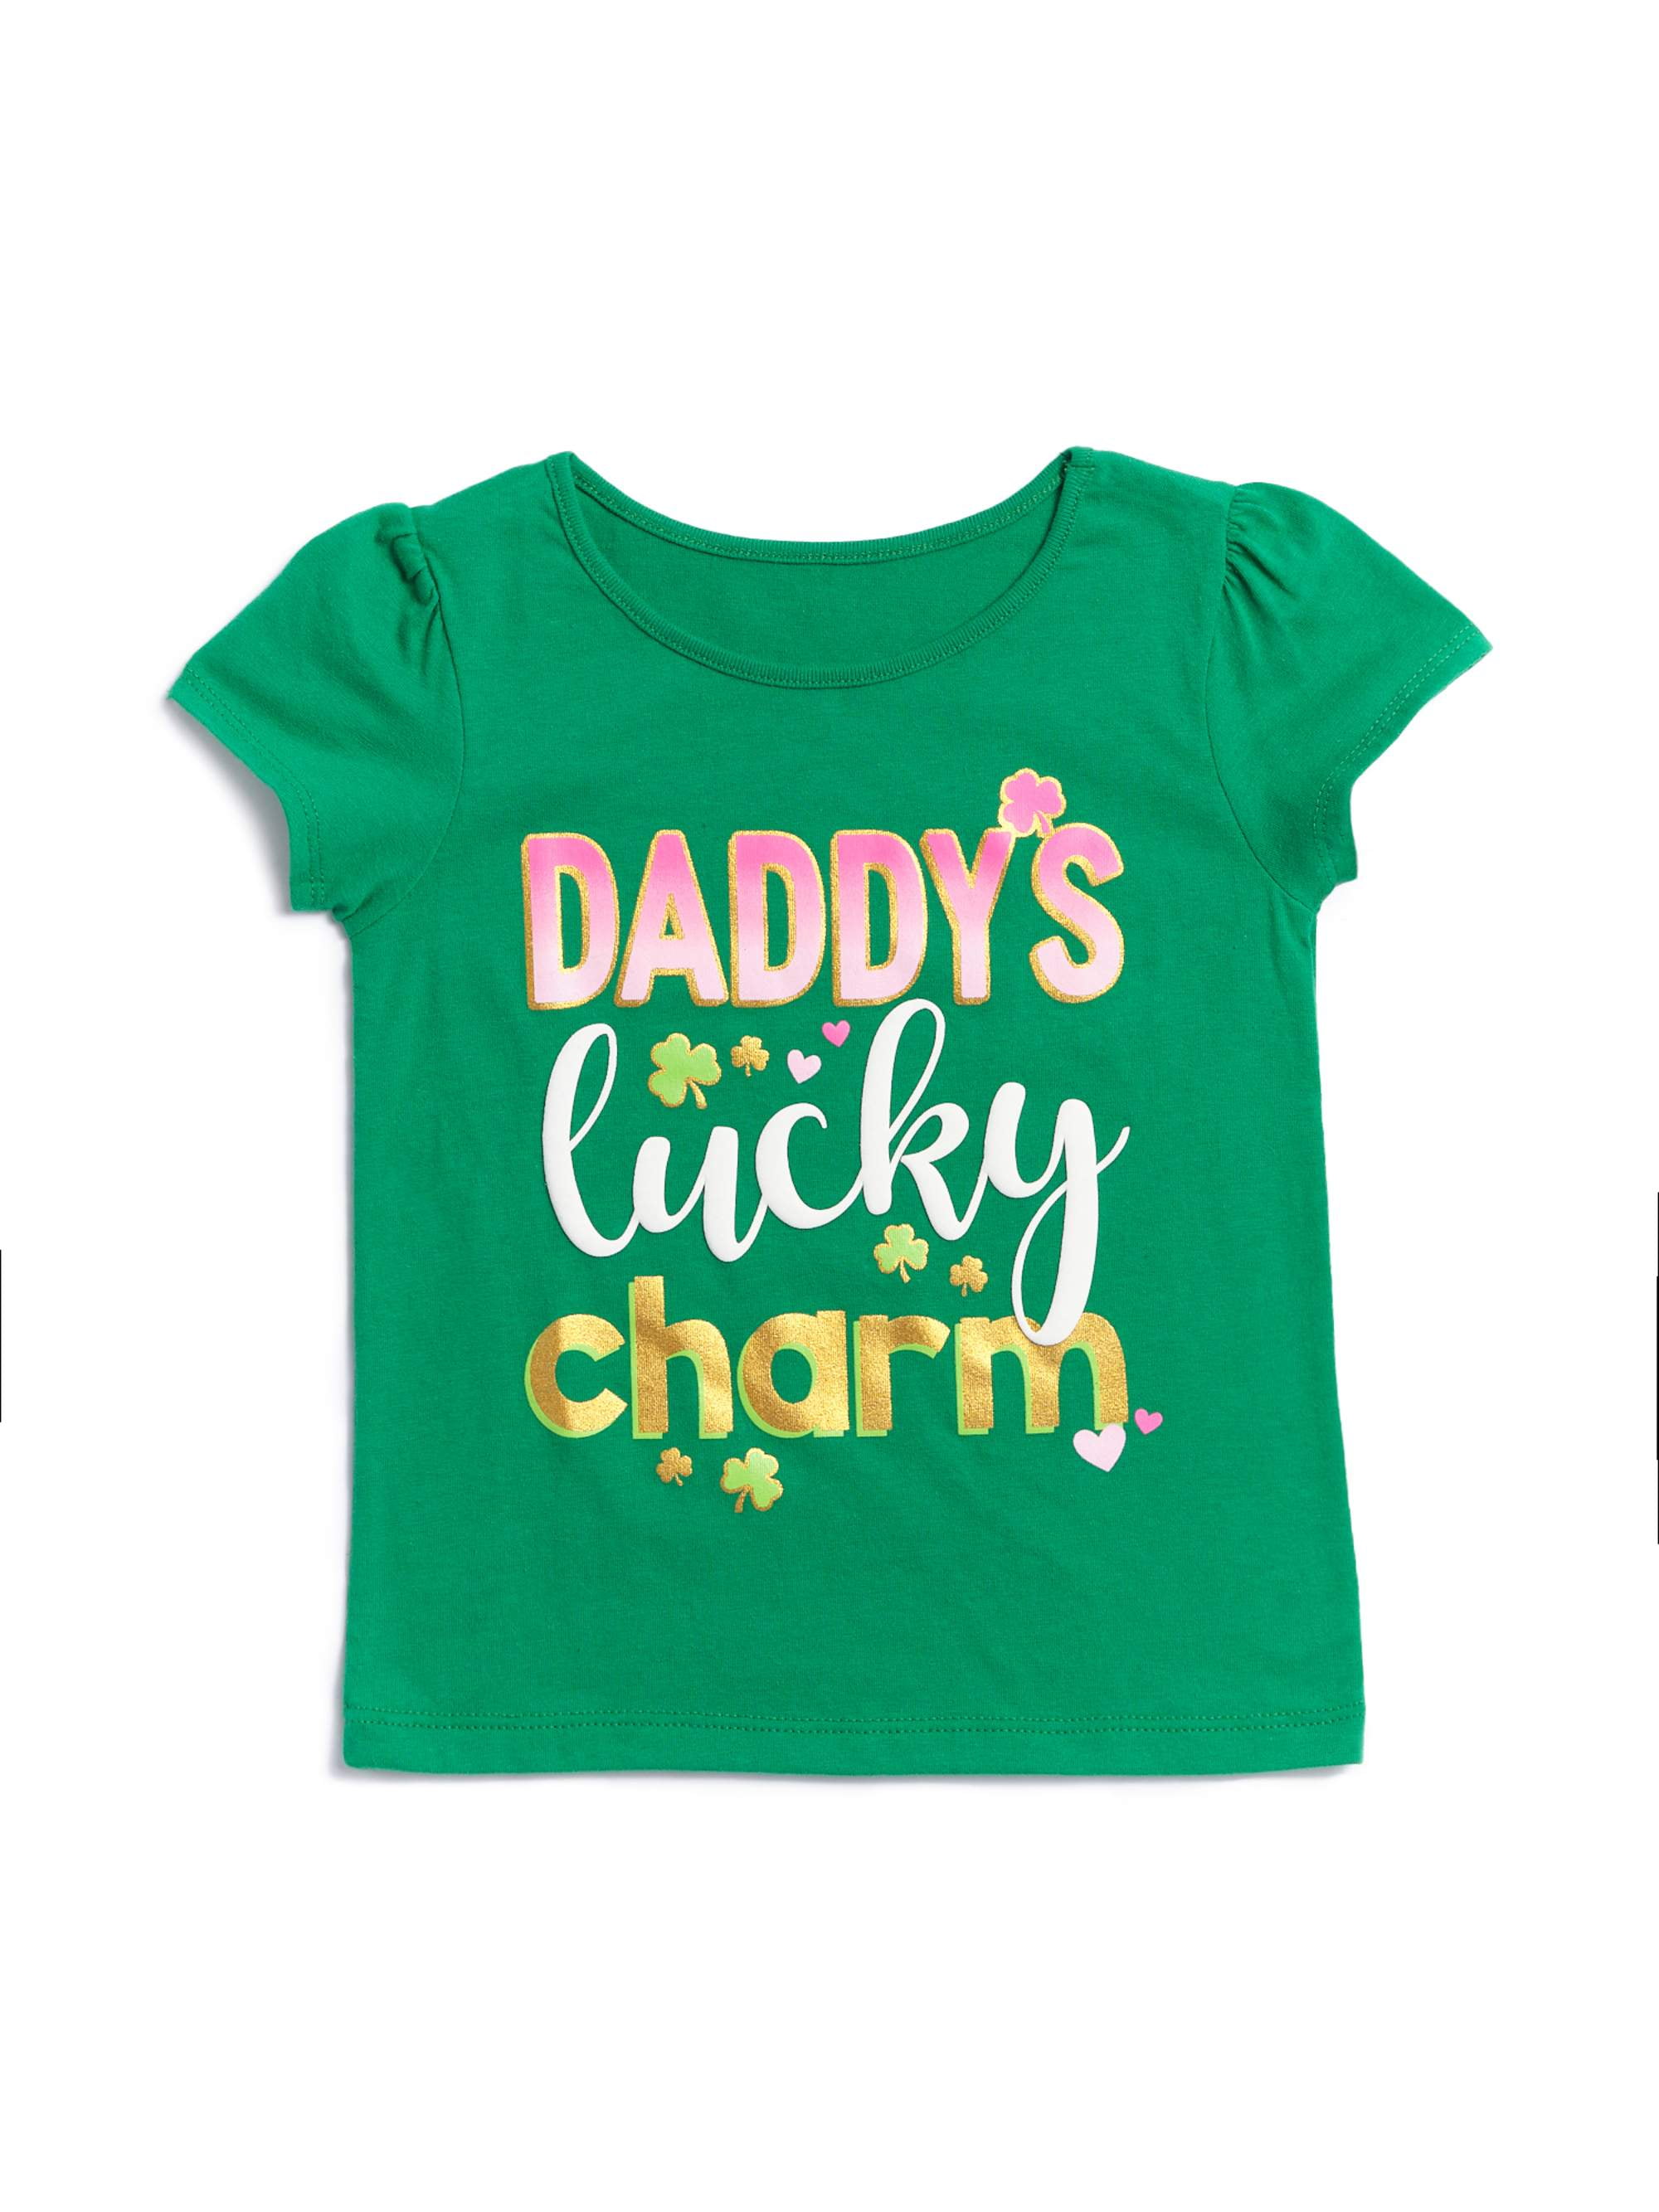 Happy St Pat Rex Day Toddler Baby Girls Cotton Ruffle Short Sleeve Top Comfortable T-Shirt 2-6T